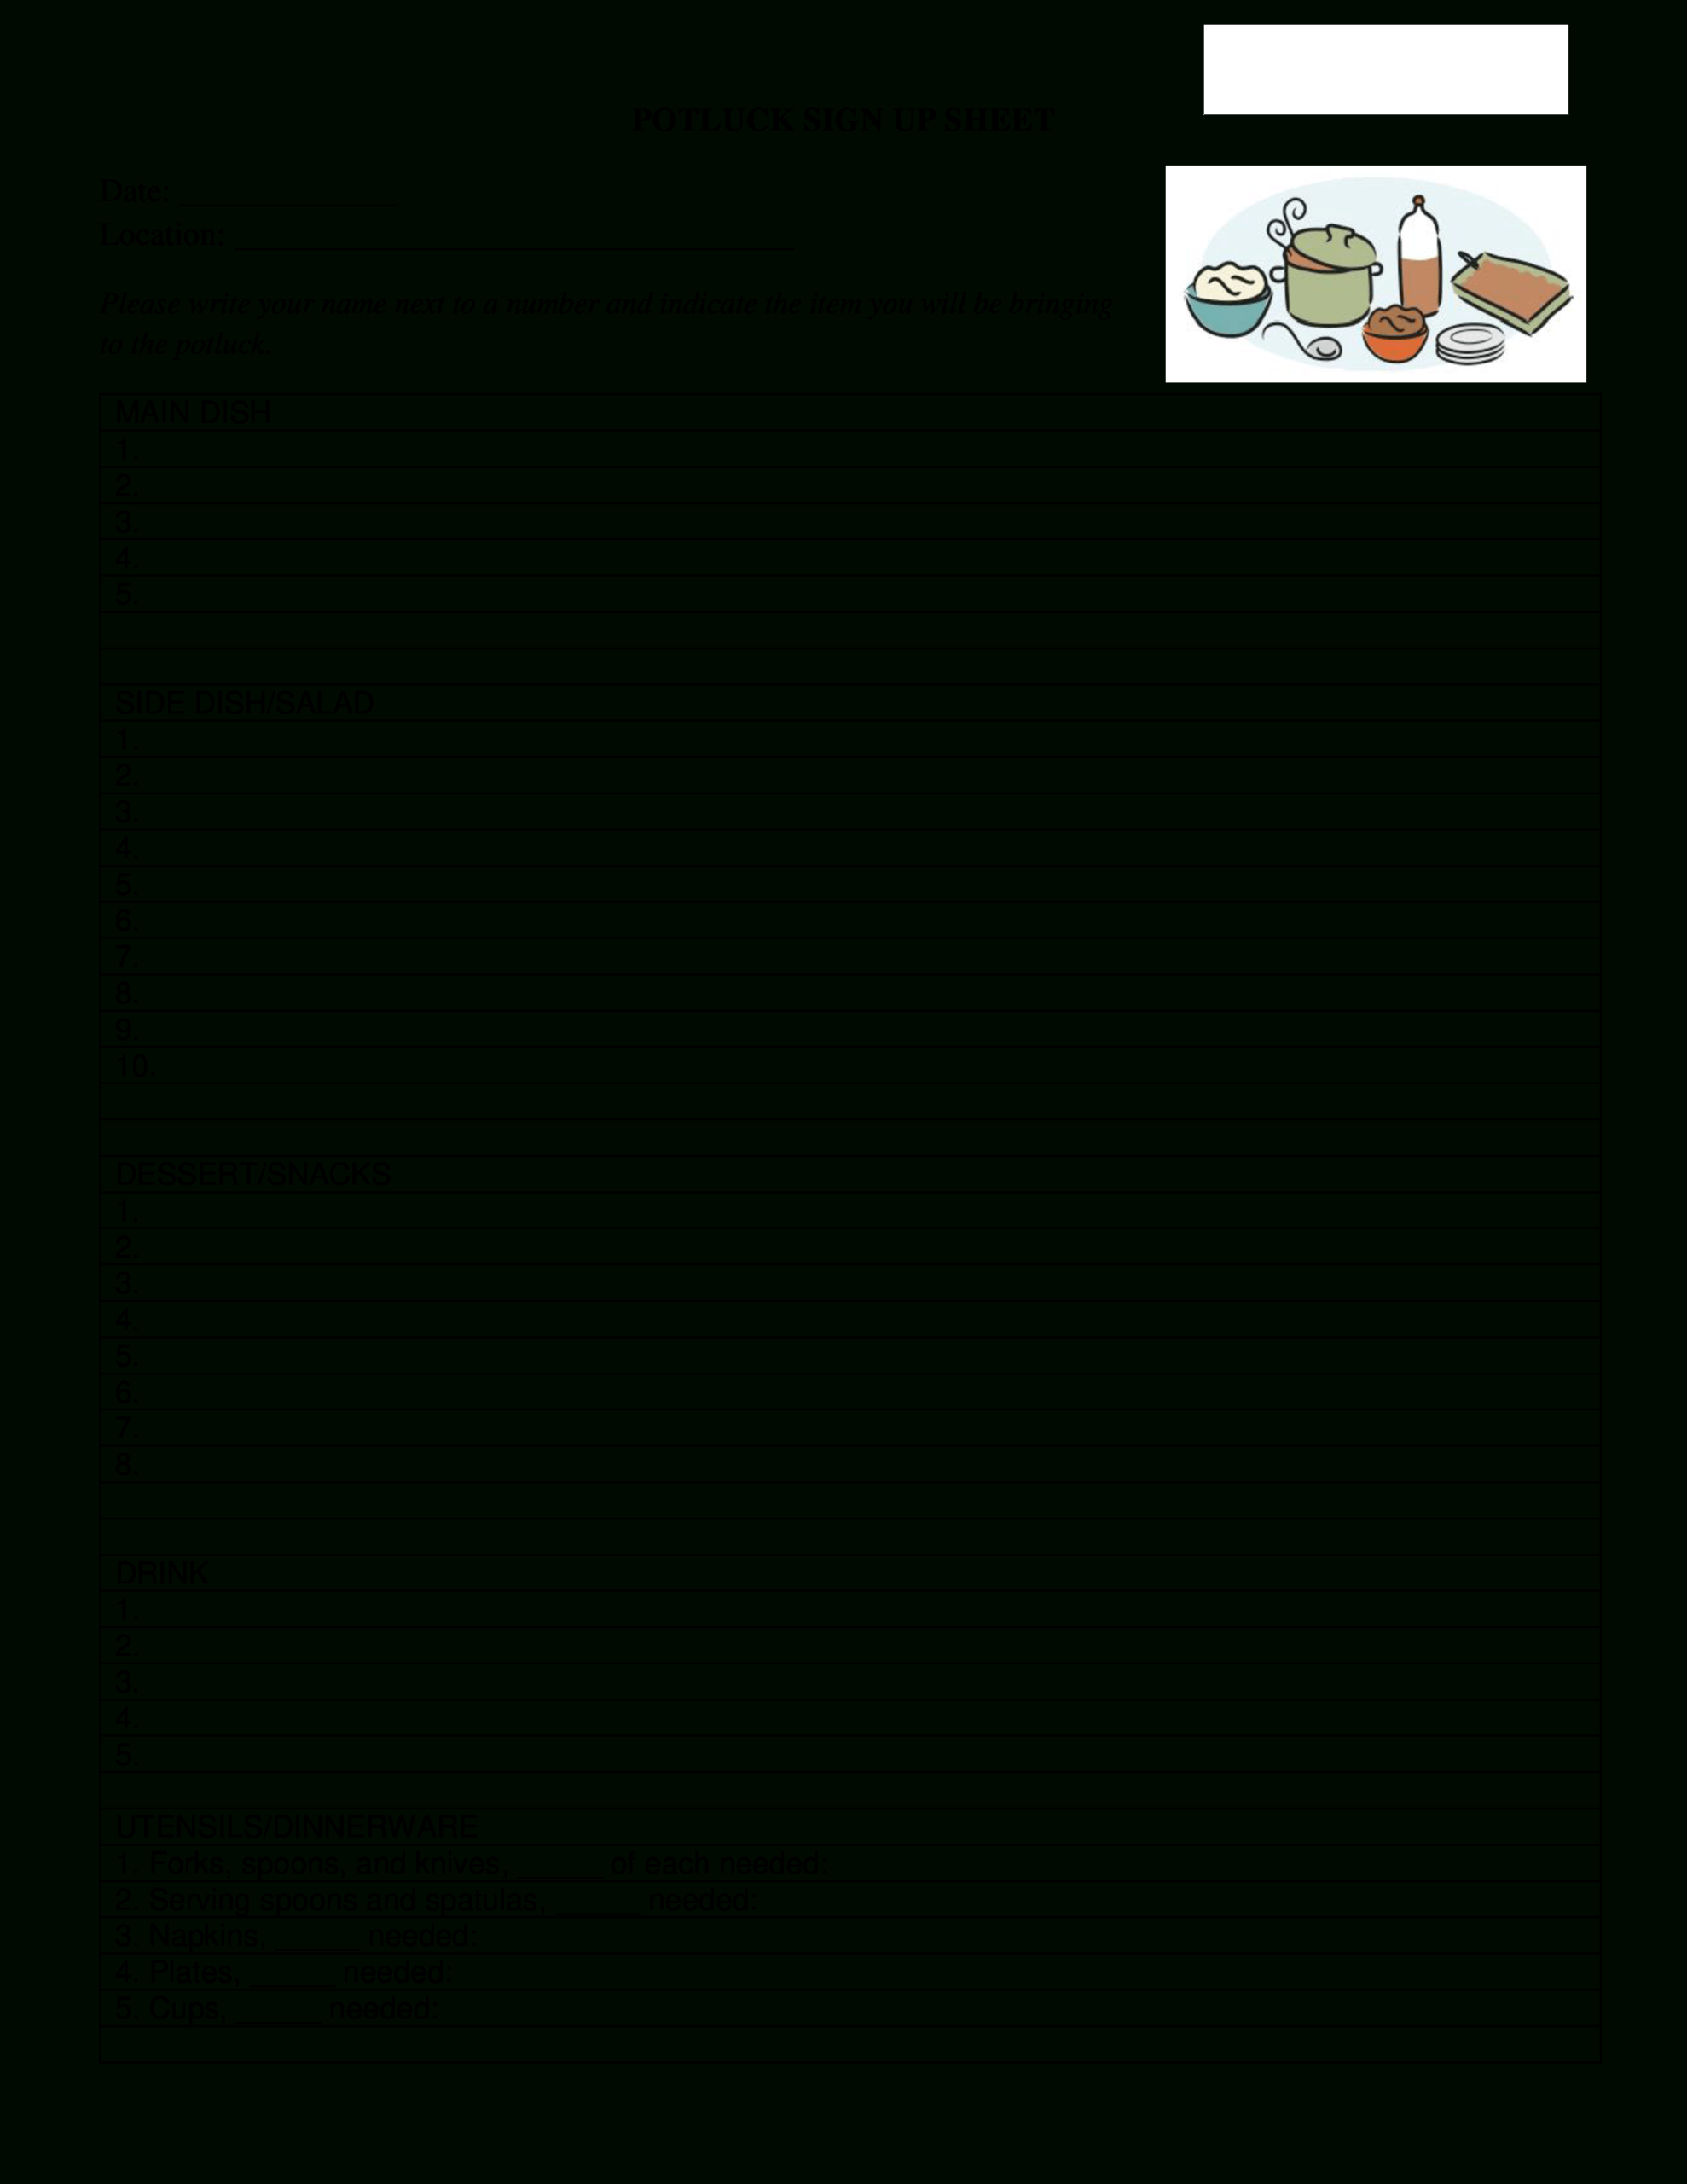 017 Potluck Signup Sheet Template Word Ideas Sign Wondrous Within Potluck Signup Sheet Template Word